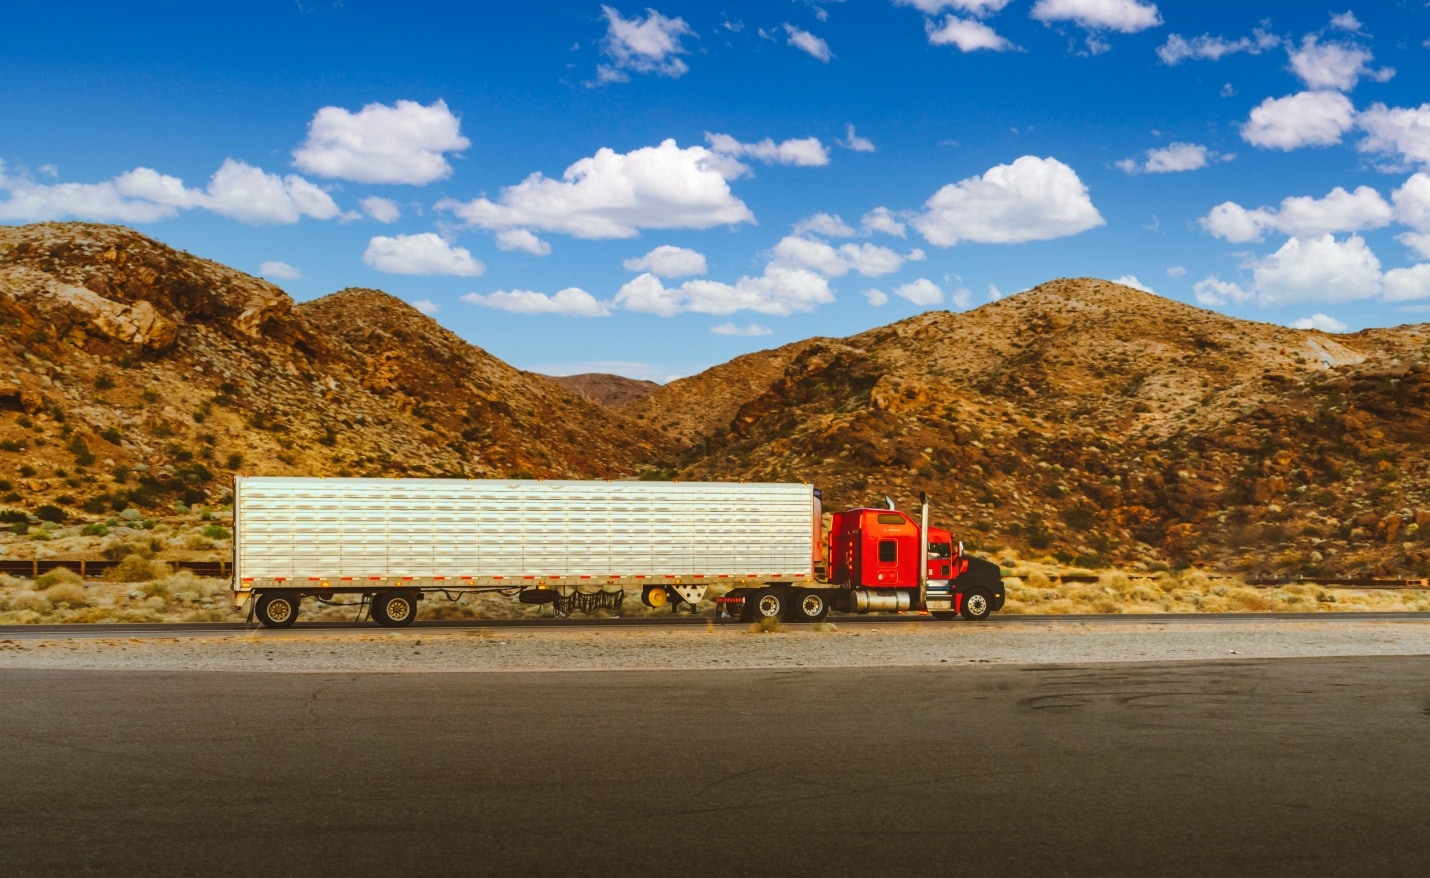 Causes of intermodal truck accidents